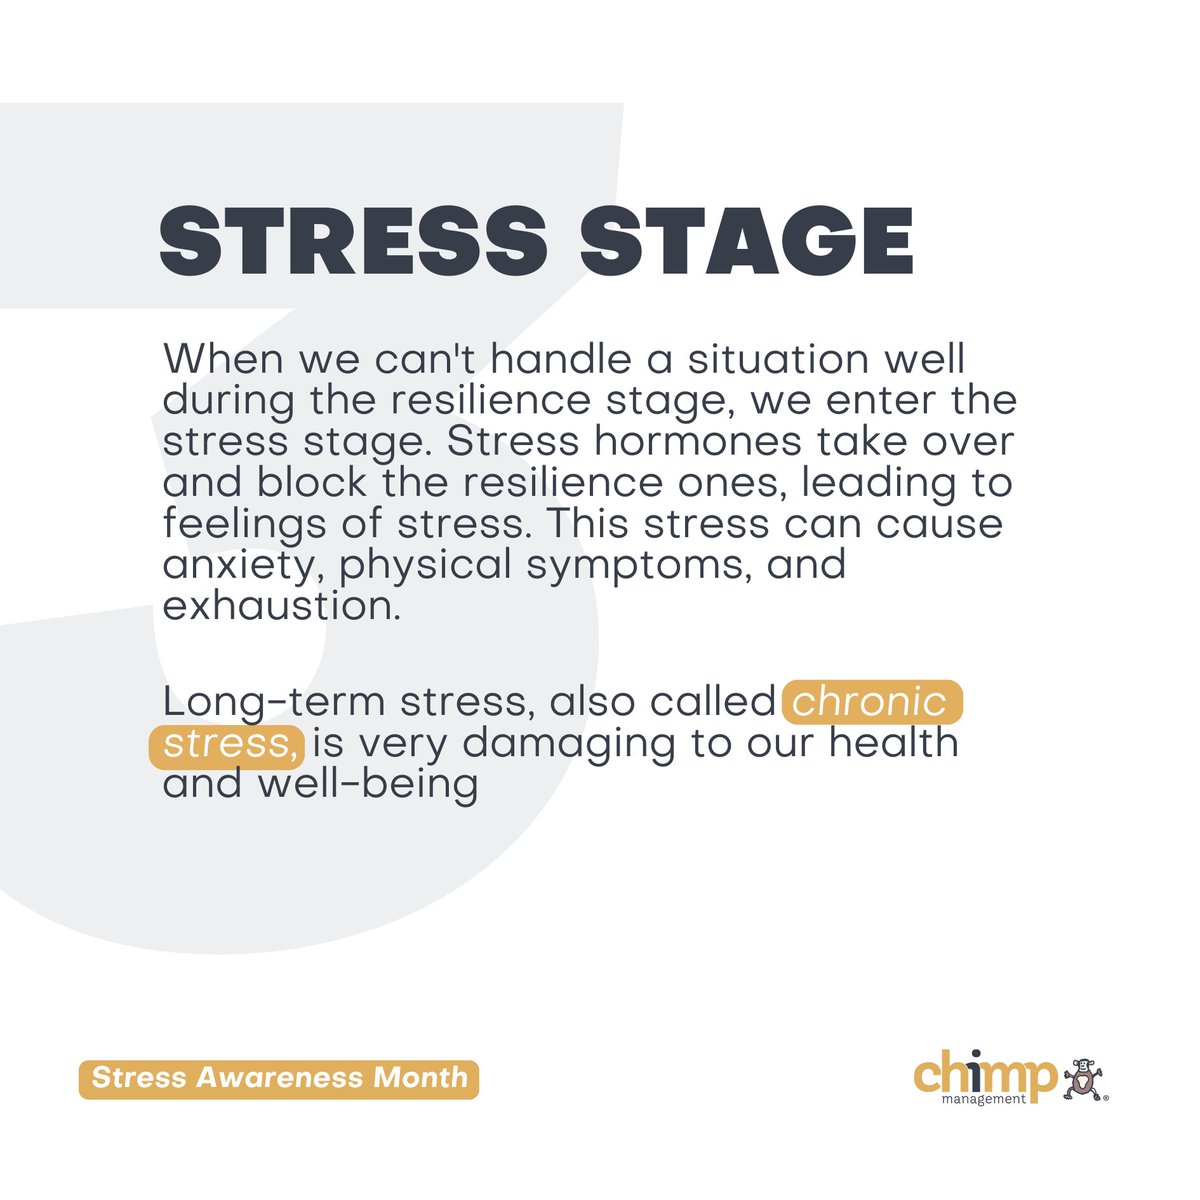 Did you know that stress has 3 stages? 🤯 Understanding the process of stress is the first step toward managing it. #Stress #StressAwarenessMonth #StressManagement #StevePeters #ChimpParadox #ChimpModel #MindManagement #SelfDevelopment #MentalHealth